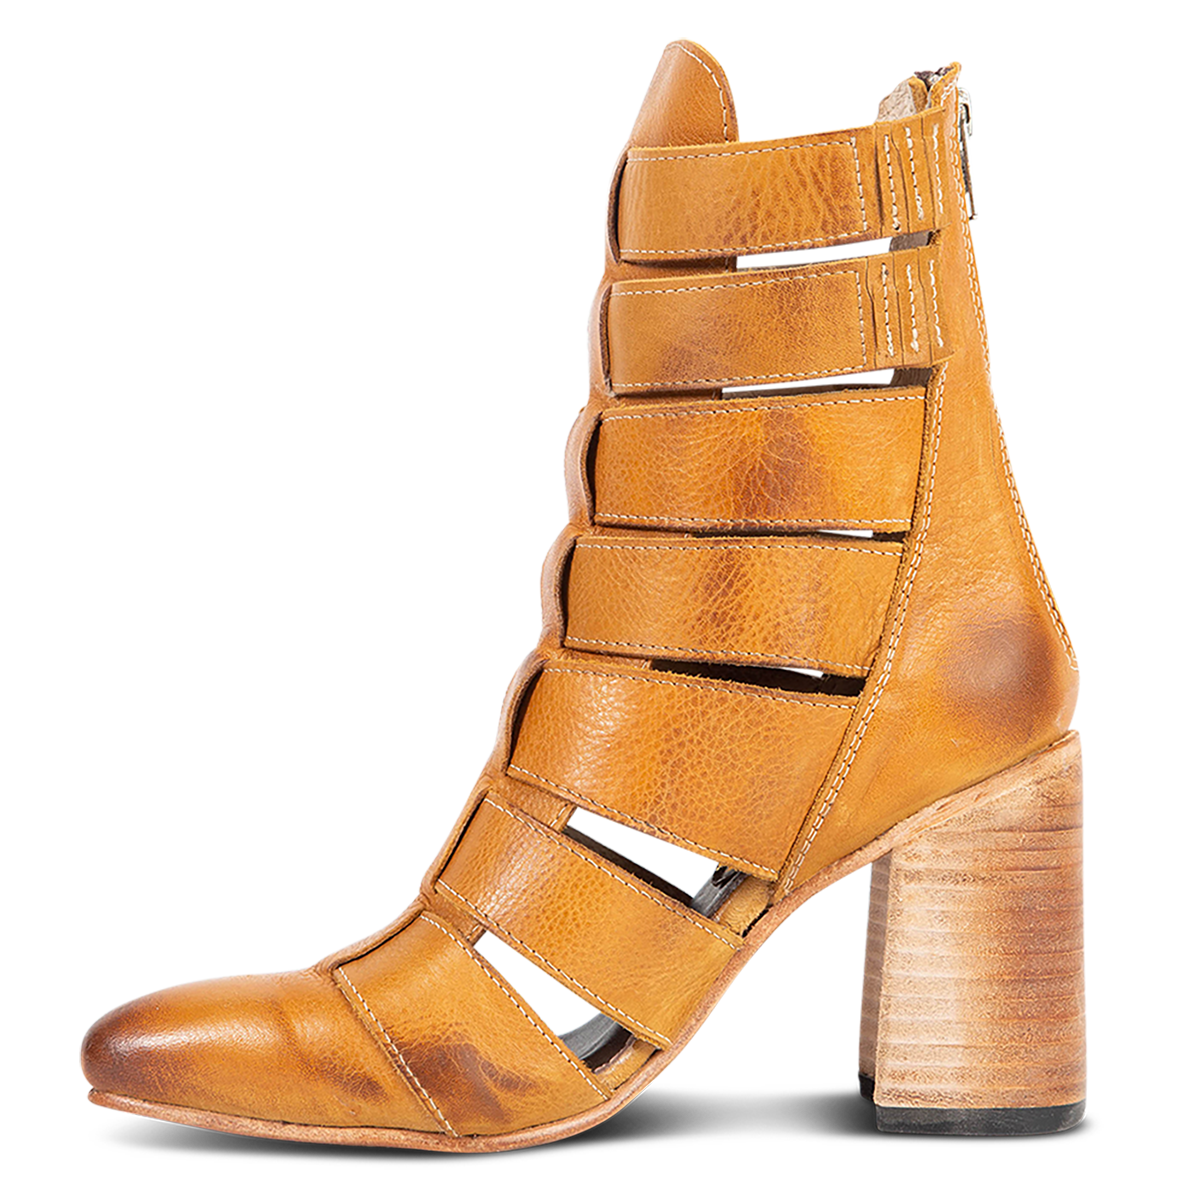 Inside view showing elastic gore detailing on FREEBIRD women's Jagger wheat leather pointed toe bootie